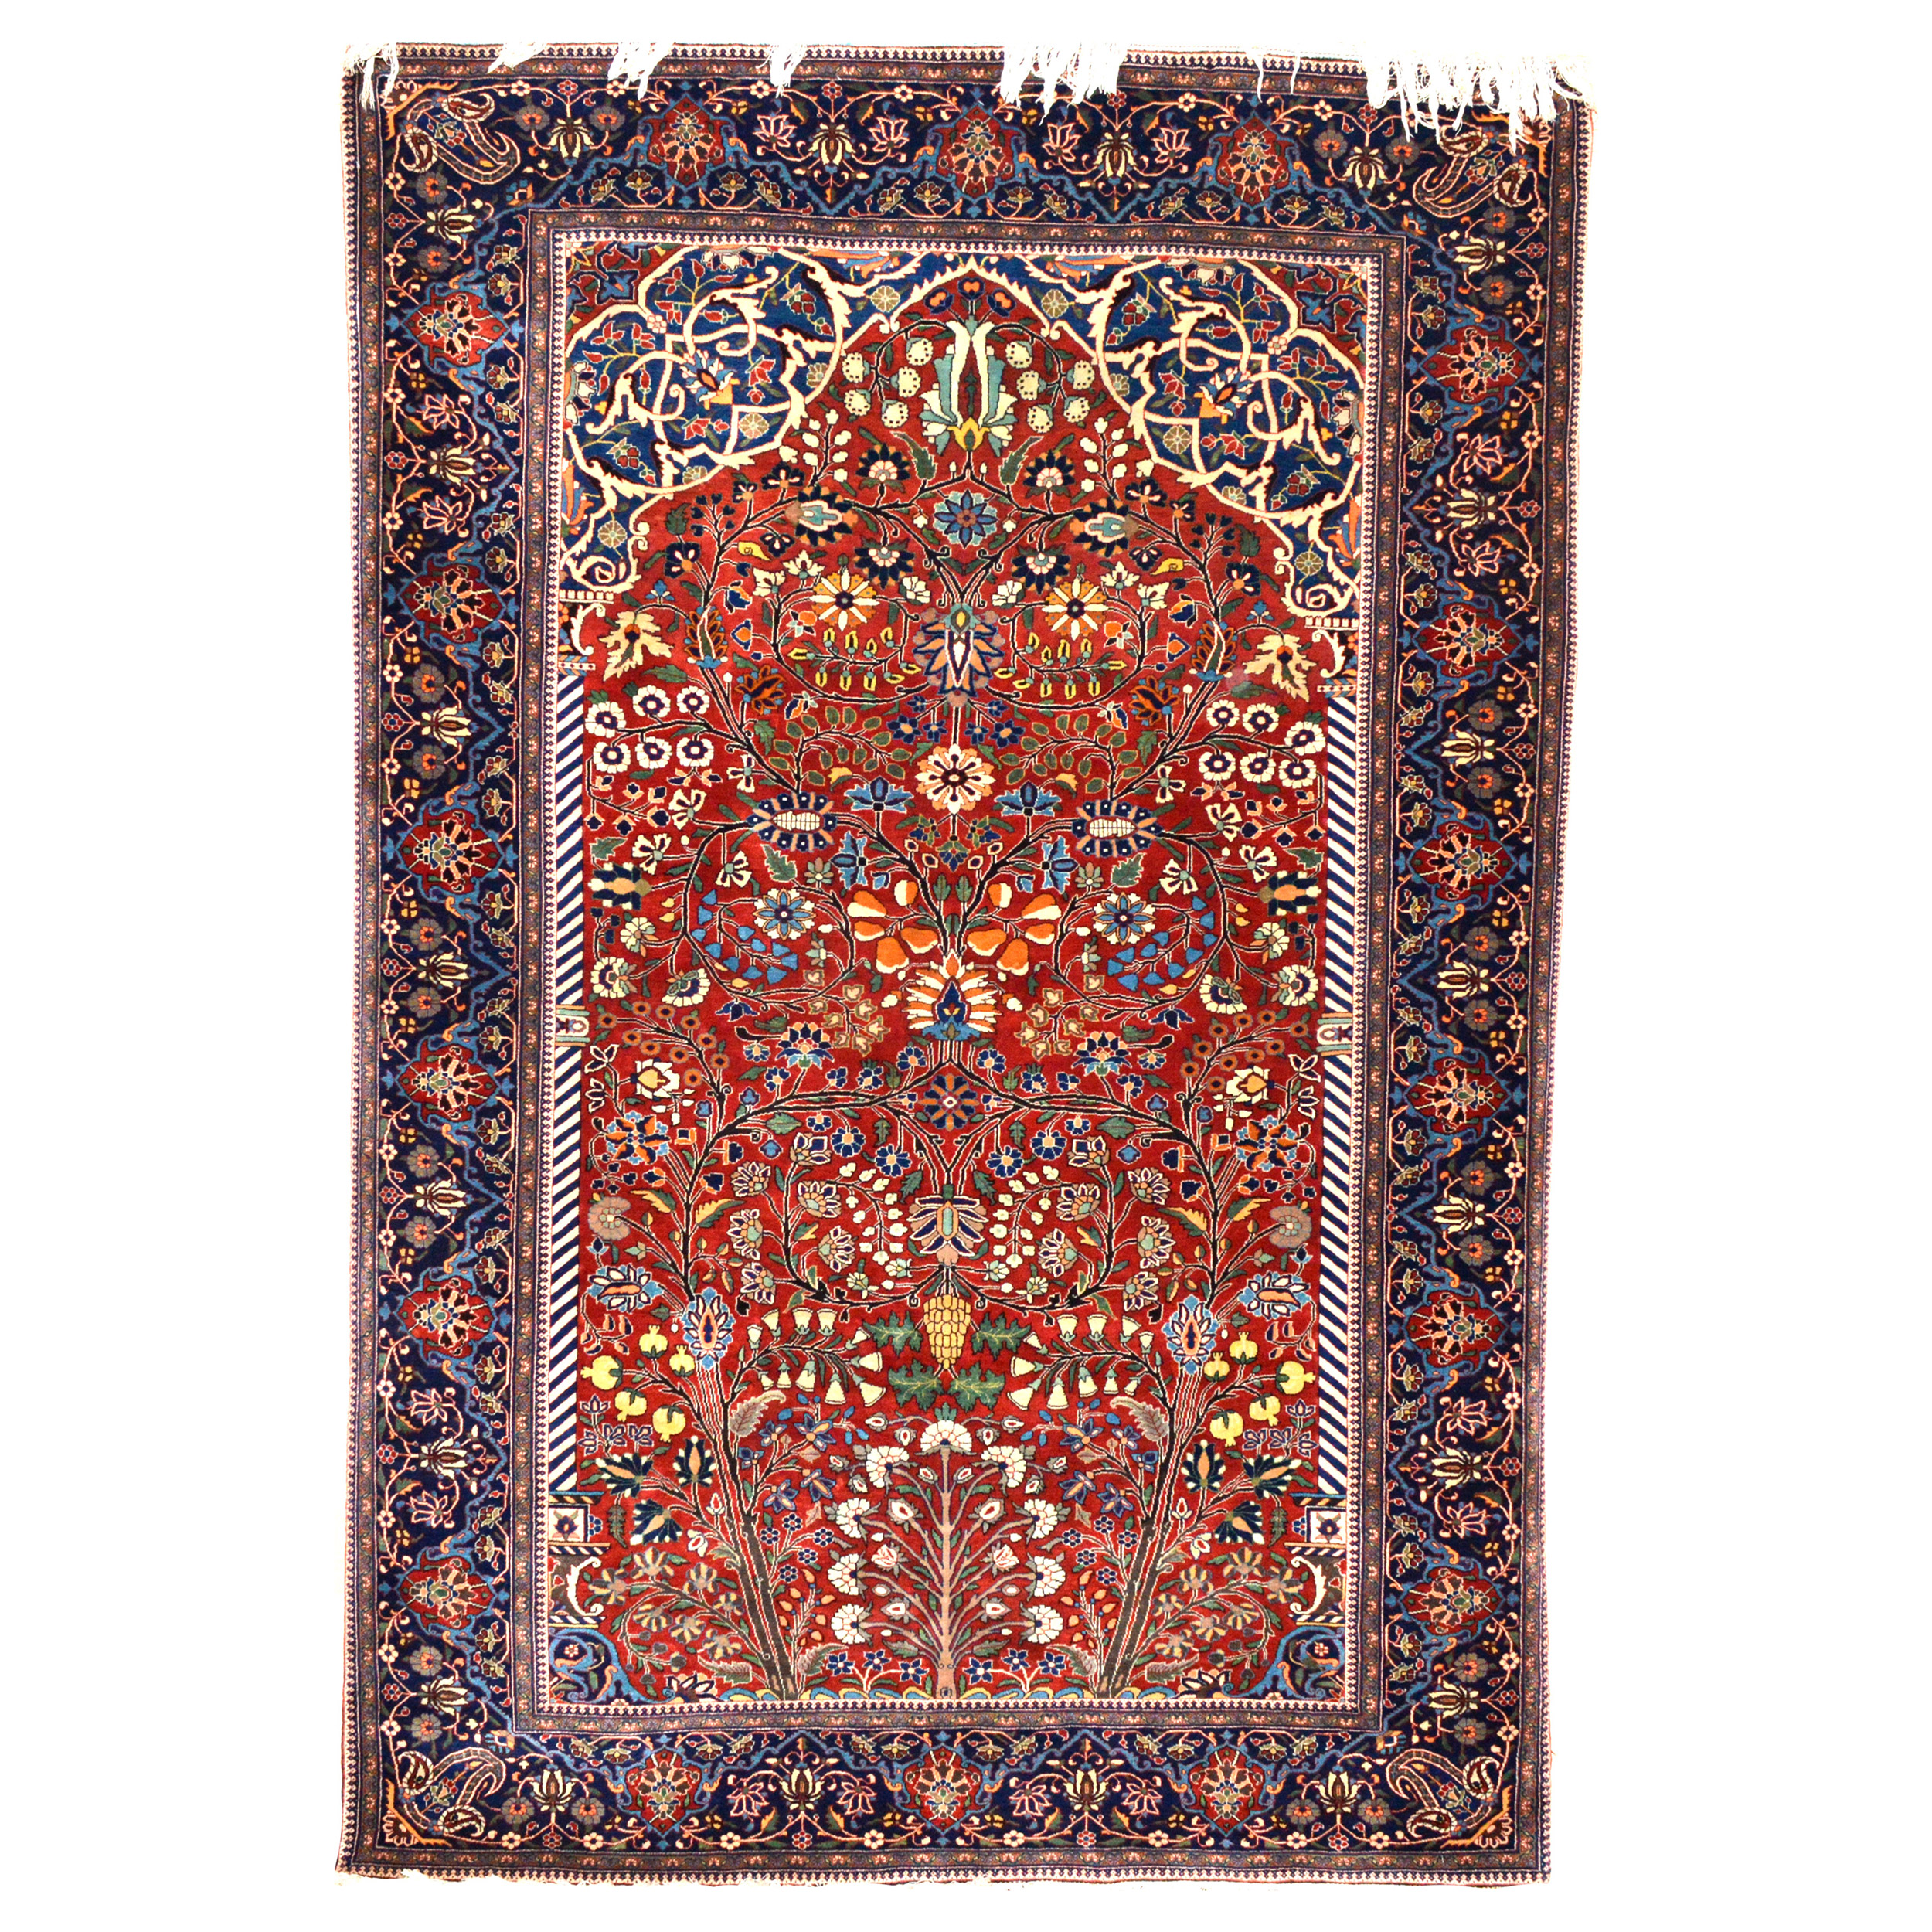 Antique Persian Mohtasham Kashan rug, circa 1900, with a directional design of various flowers - Douglas Stock Gallery, antique Persian rugs Boston,MA area, antique Oriental rugs South Natick / Wellesley area